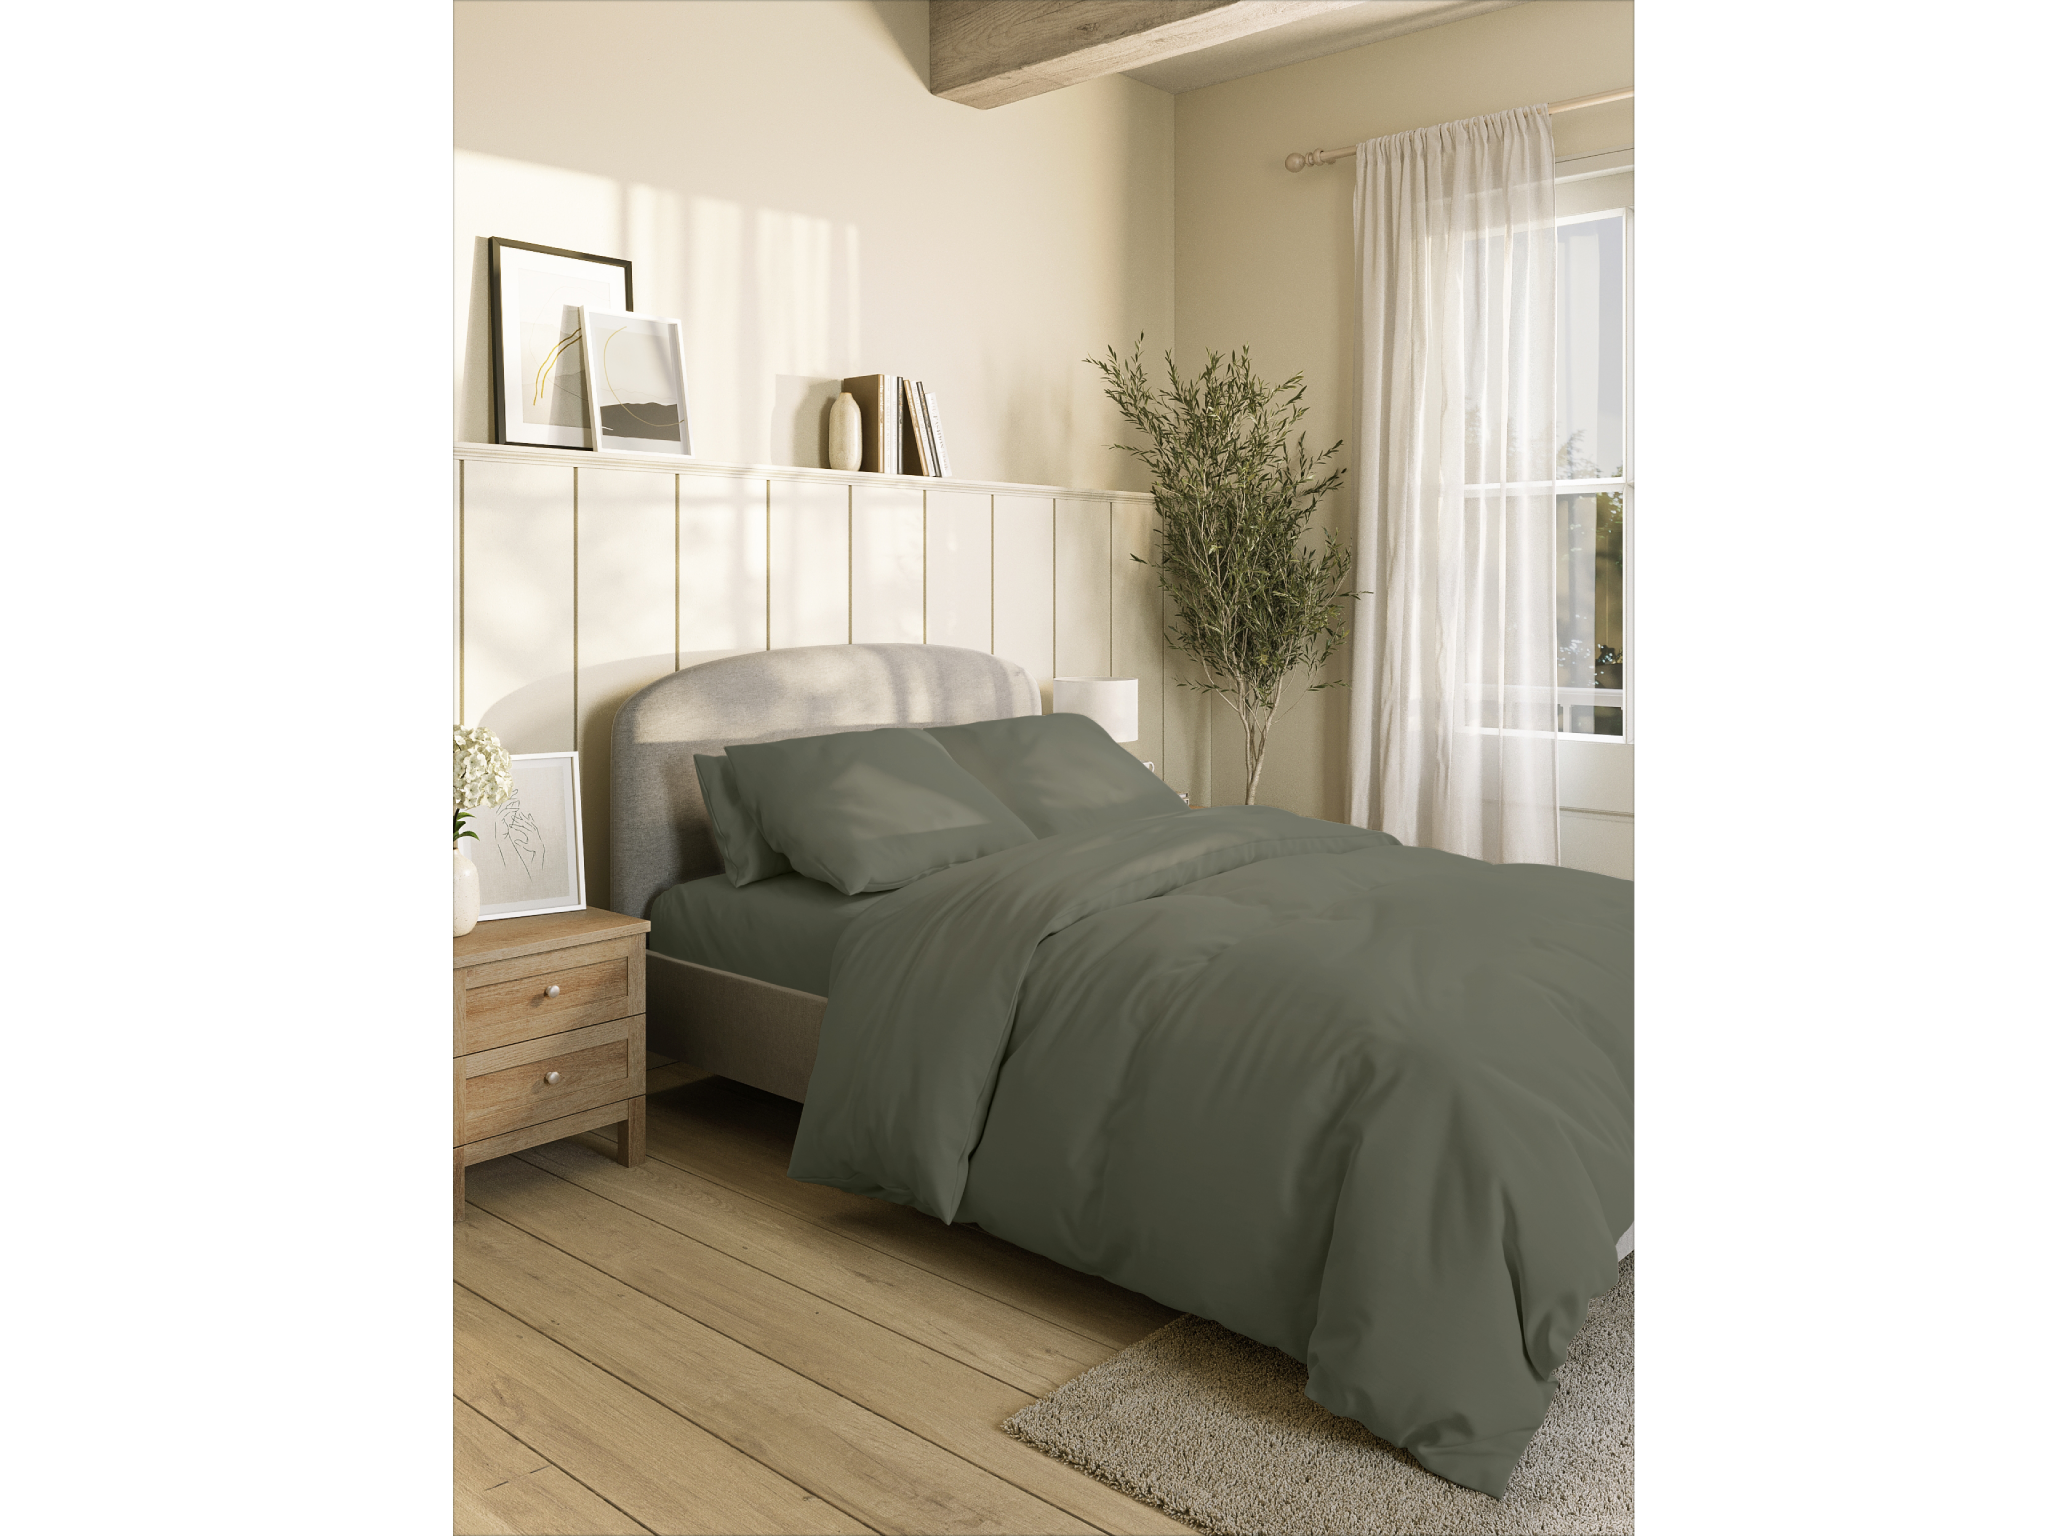 Marks-& -Spencer-Egyptian-cotton-230-thread-count-bedding-indybest